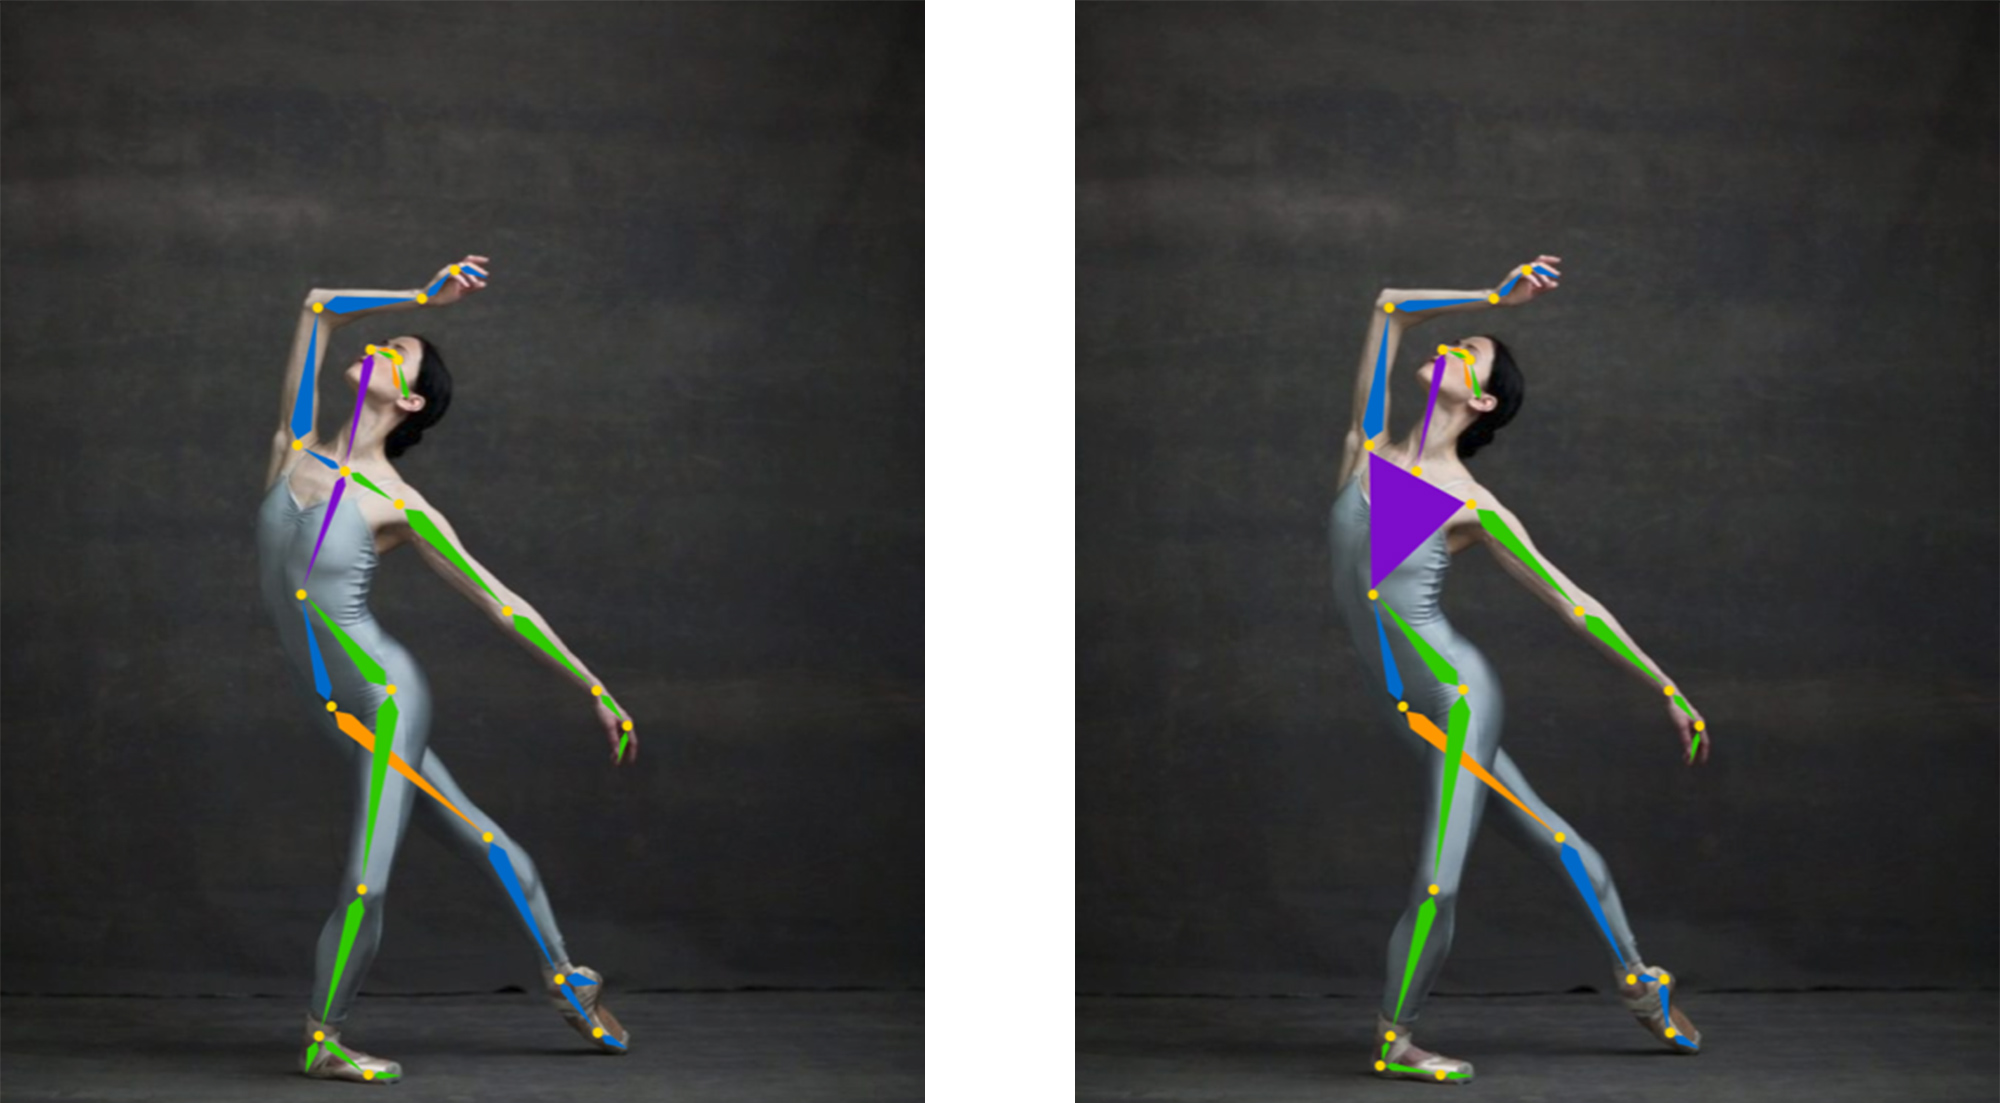 What: Image of an app that uses AI to teach ballet.